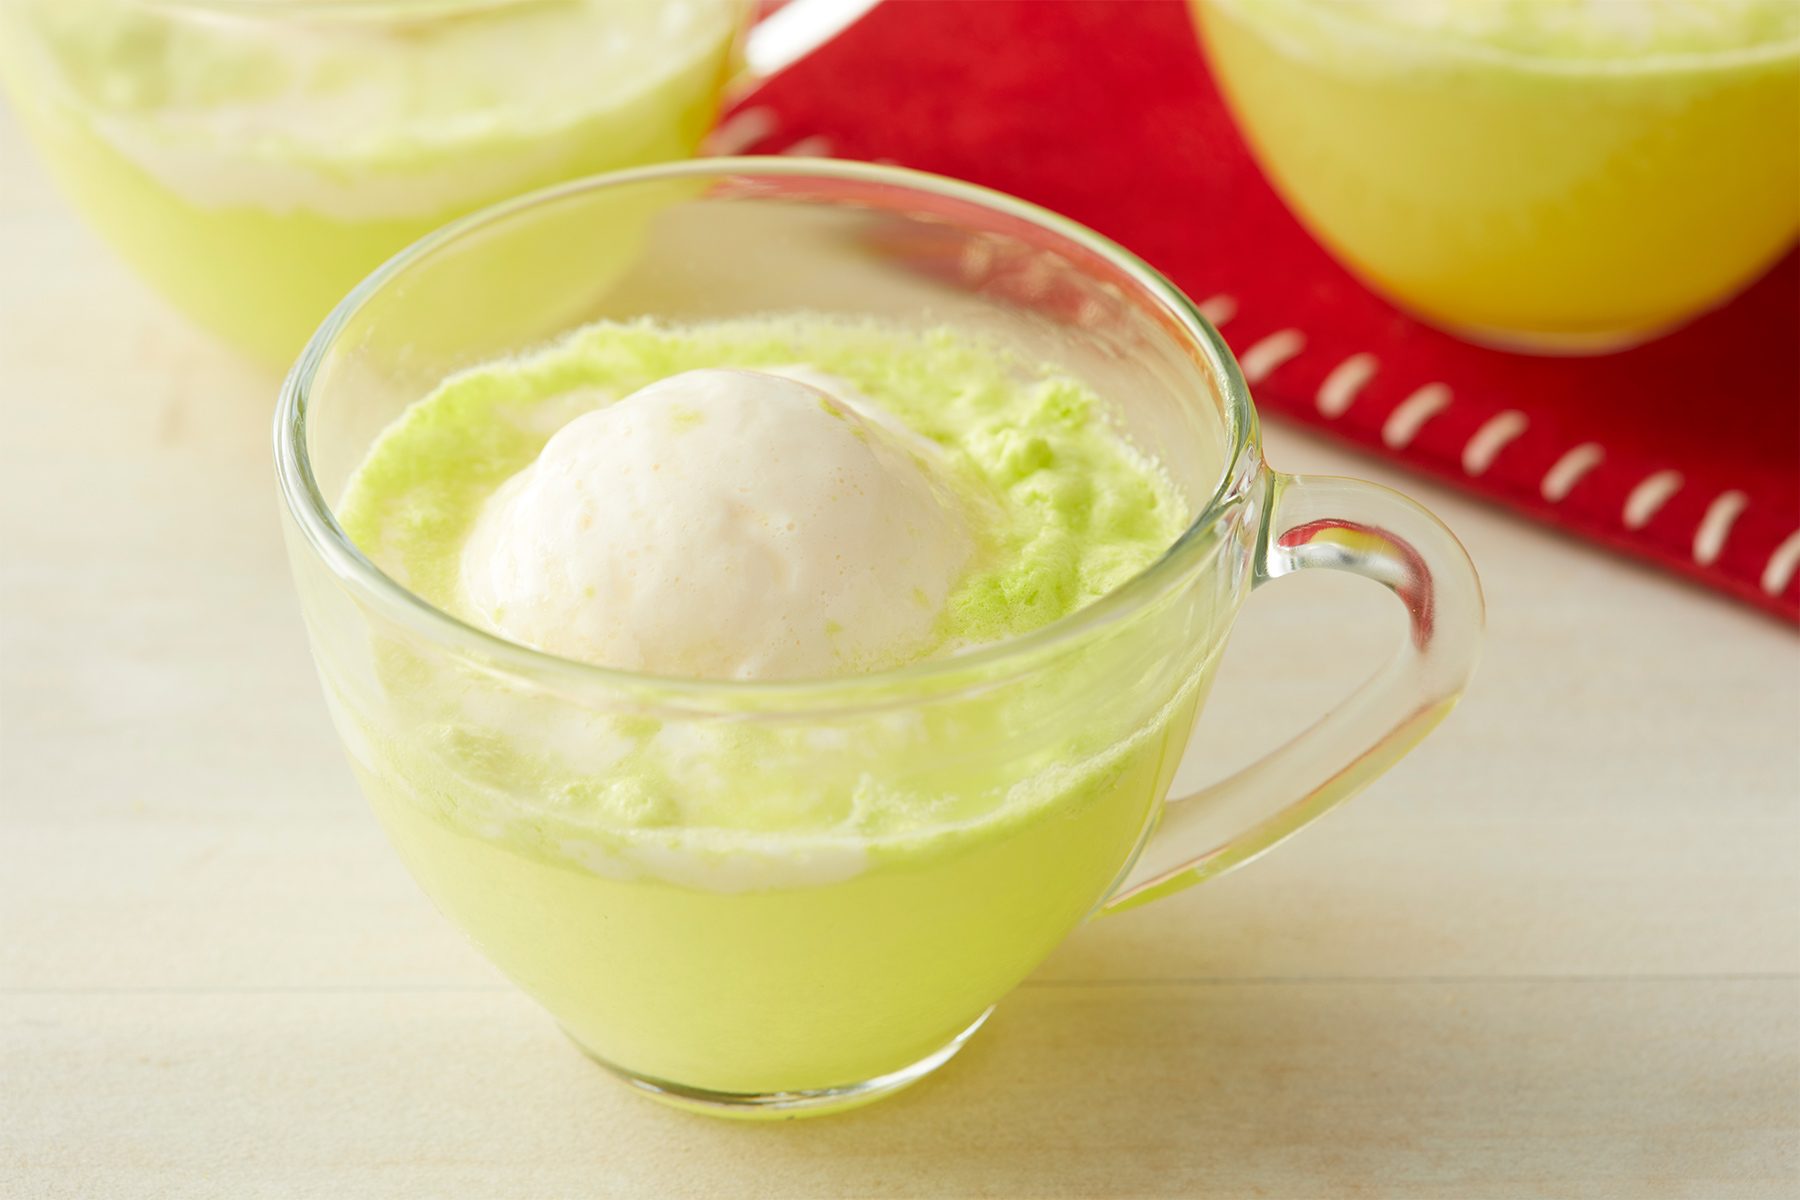 A clear glass mug filled with a light green beverage, topped with a scoop of vanilla ice cream. Two more identical mugs are blurred in the background, placed on a red cloth with white stitching. The scene is set on a light-colored surface.